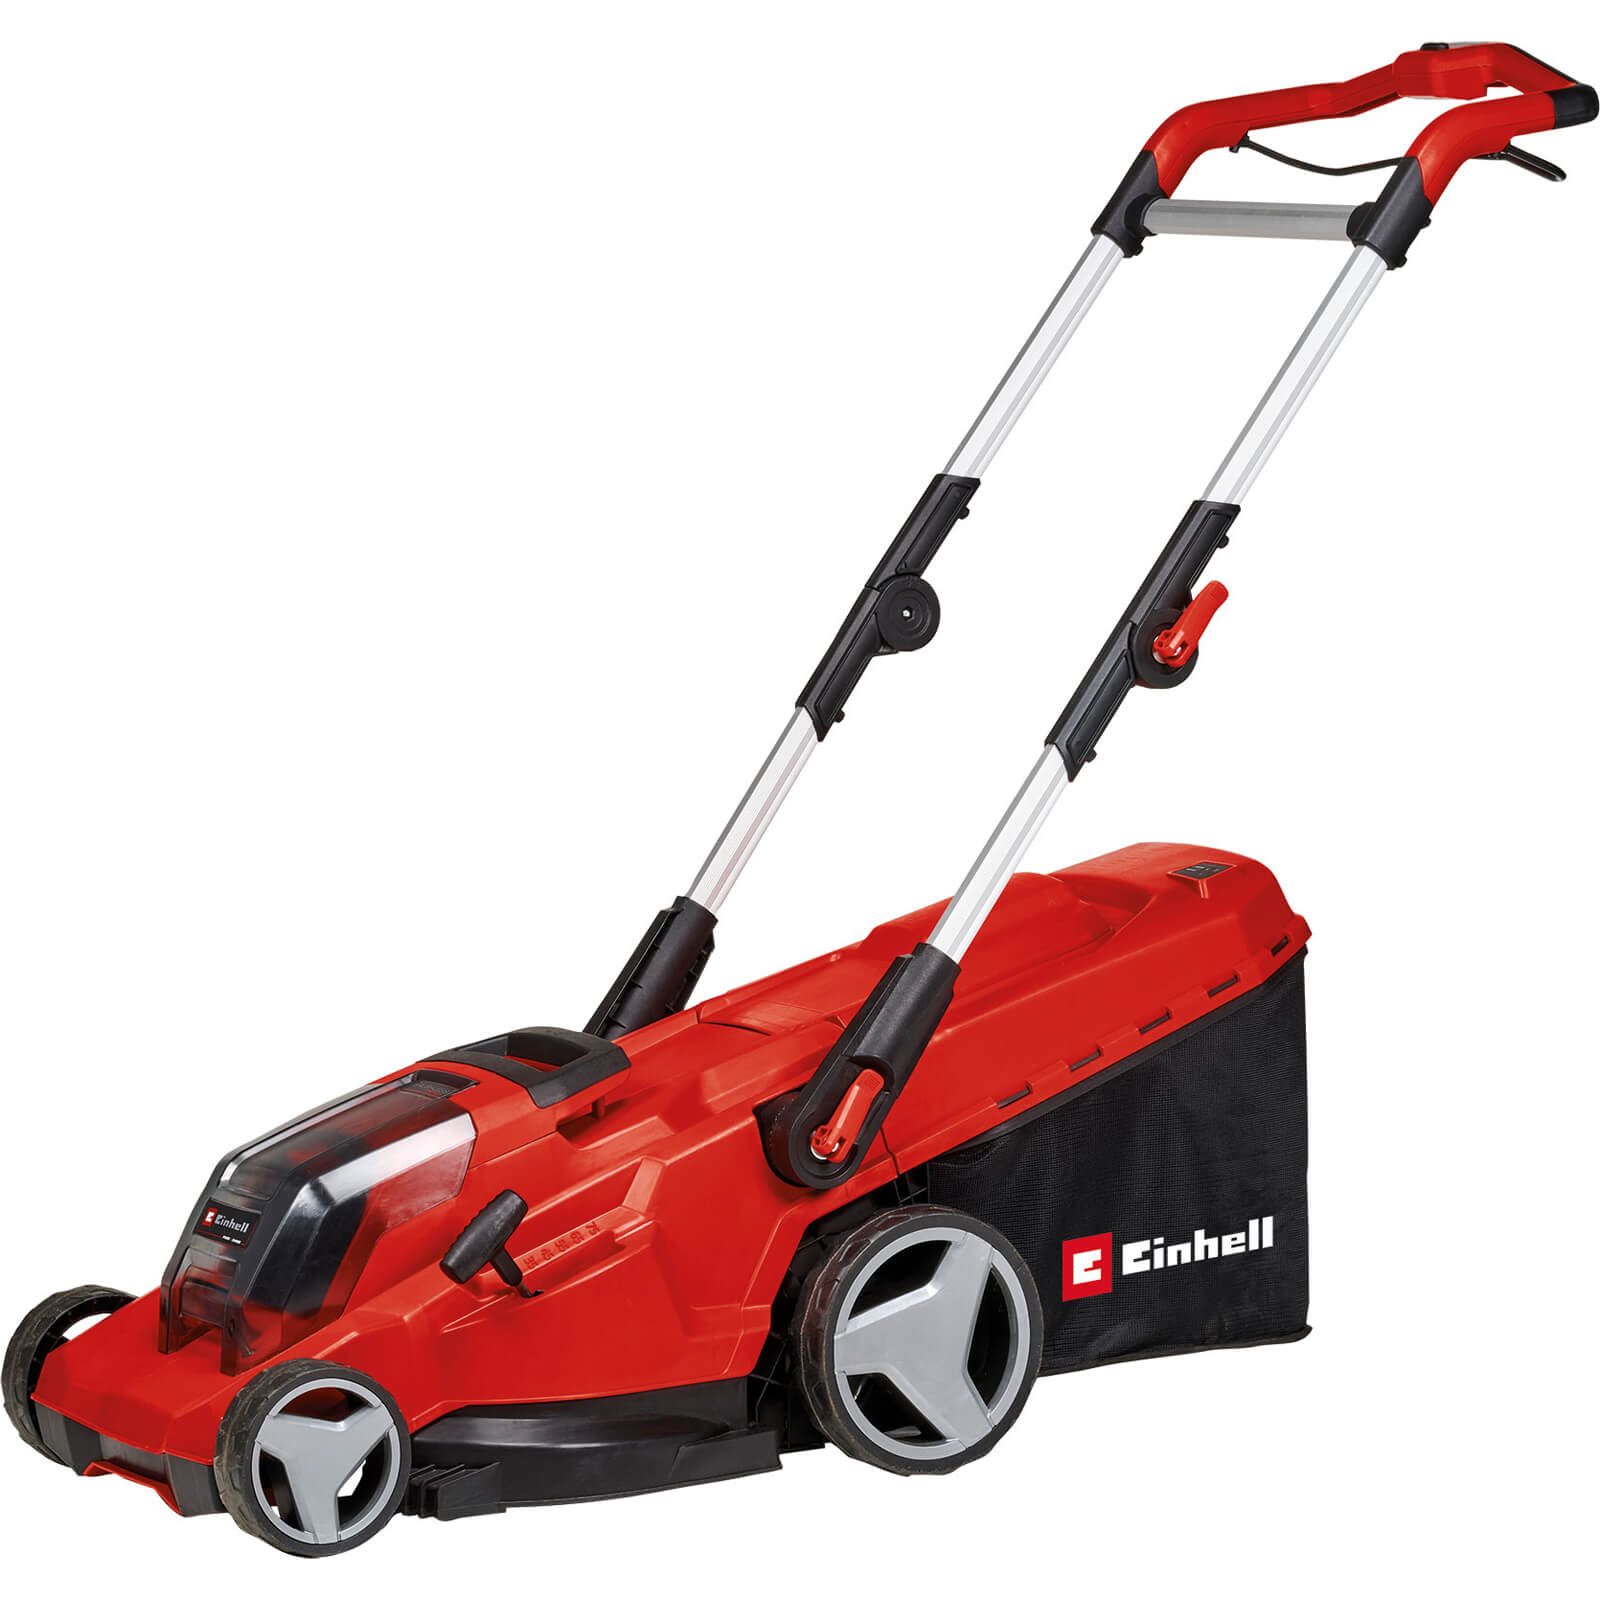 Image of Einhell GE-CM 36/41 Li 36v Cordless Brushless Rotary Lawnmower 410mm No Batteries No Charger